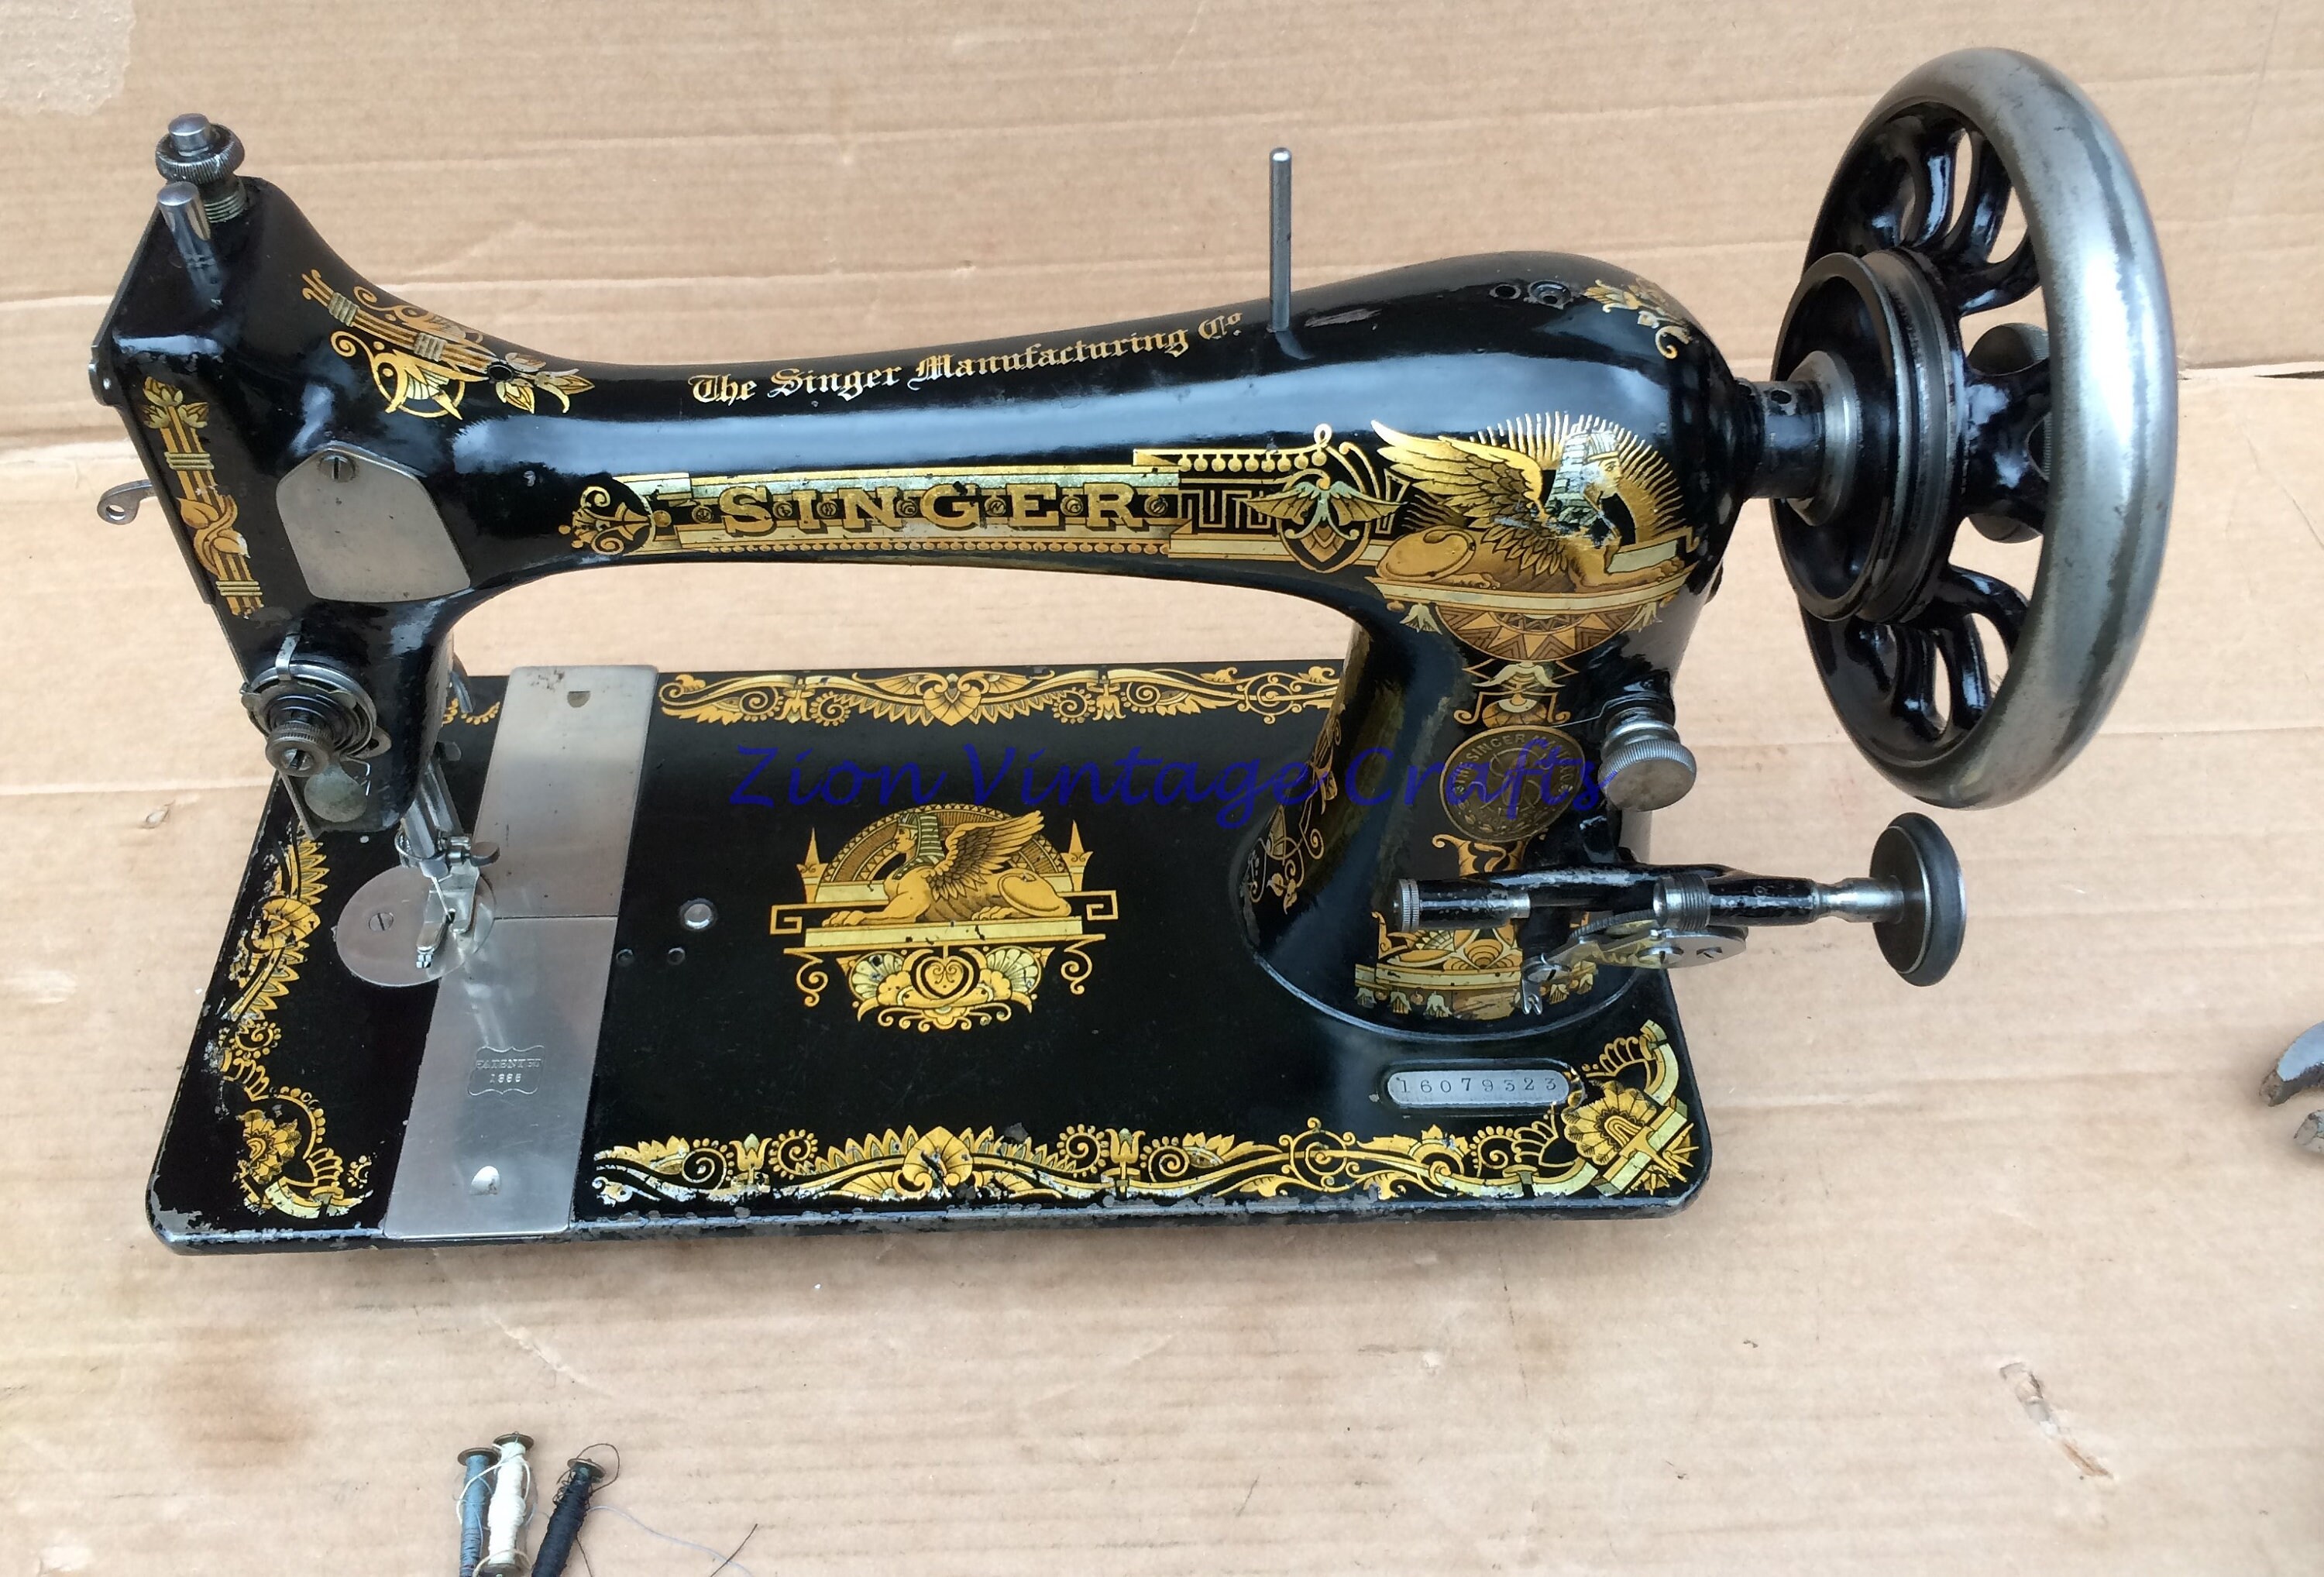 Singer 27 Treadle Sewing Machine - The Quilting Room with Mel